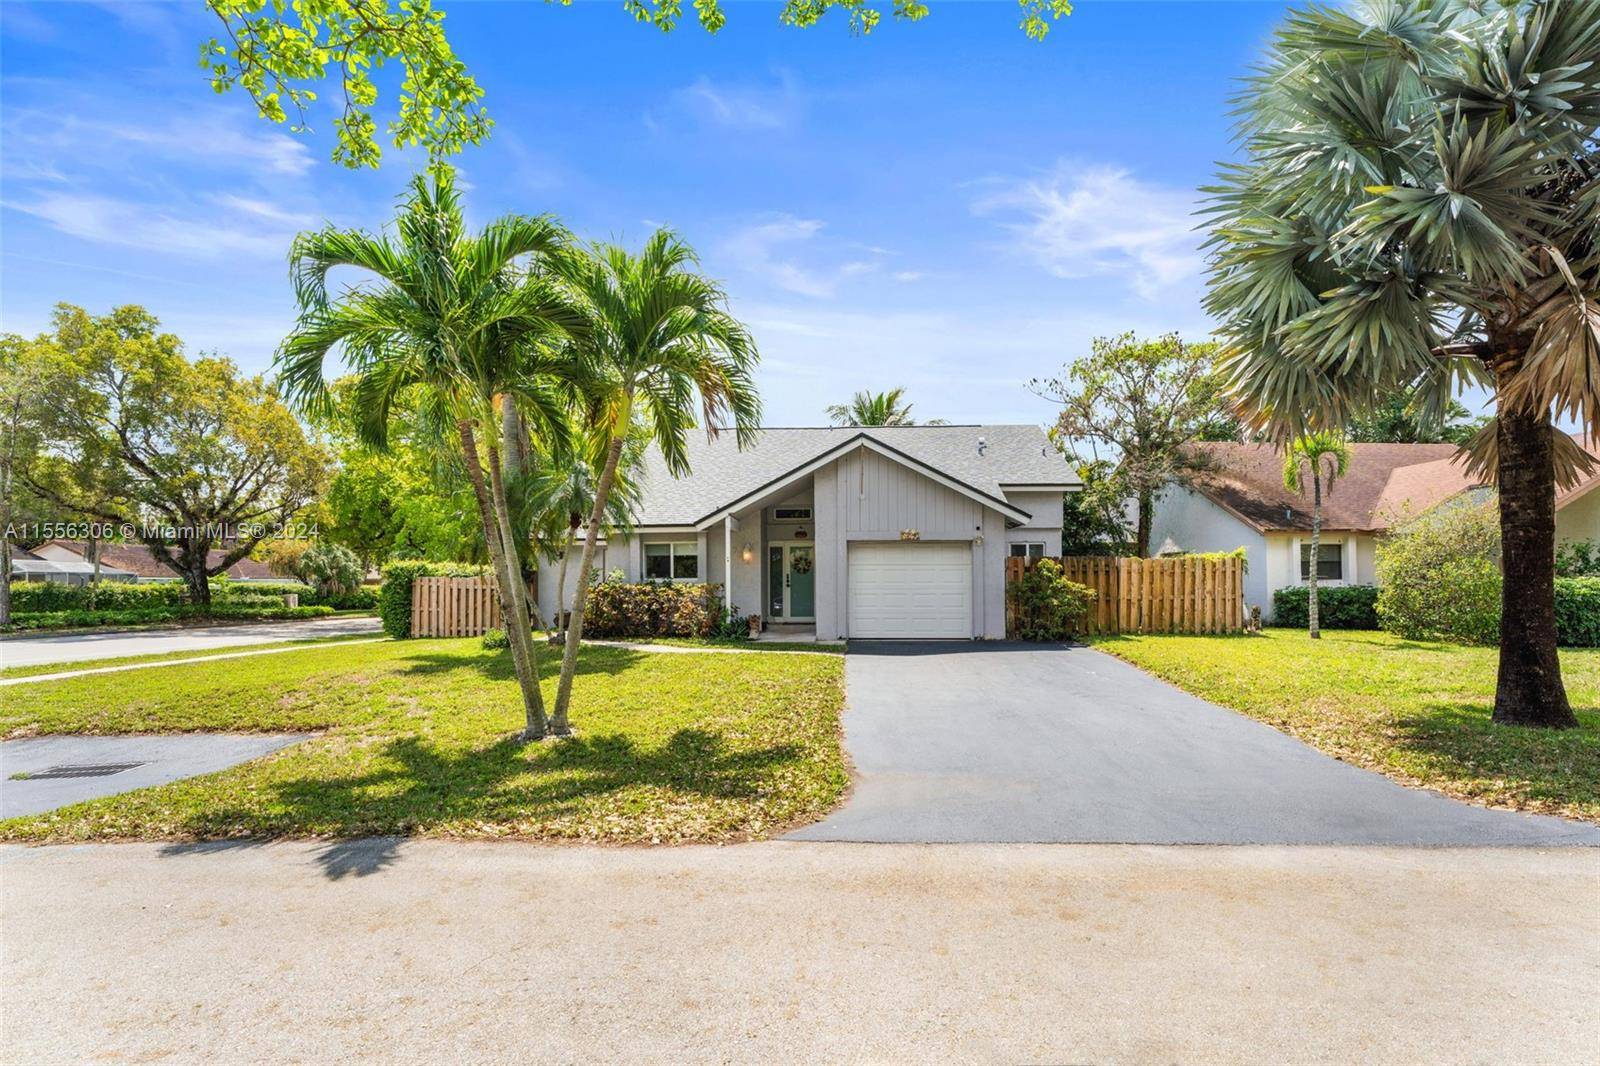 Welcome to this meticulously upgraded home with no HOA in a desirable area of The Crossings.